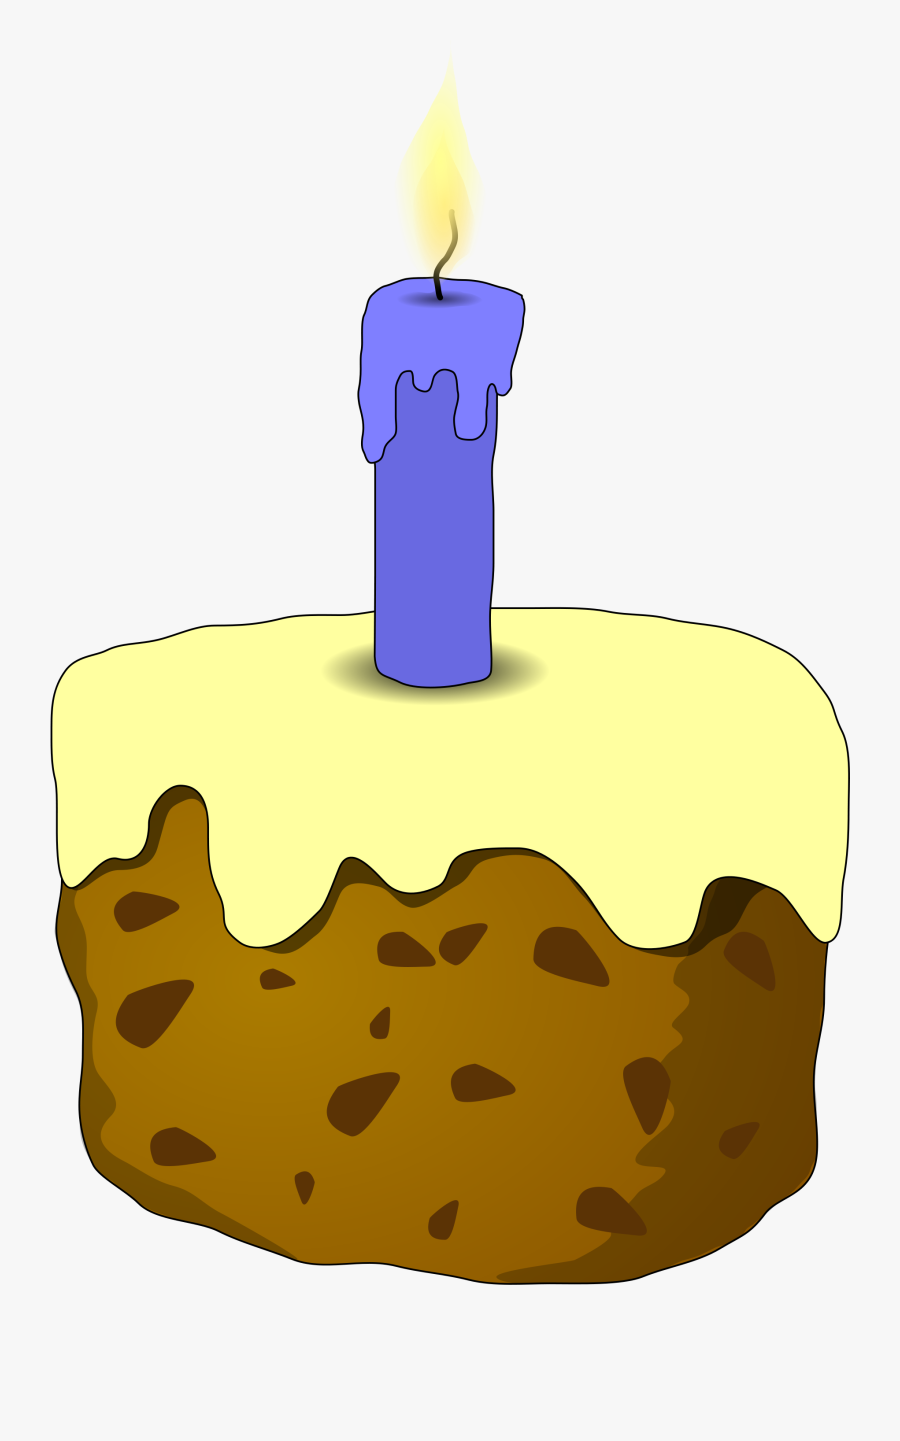 Filecake And Candle - Cake With Candles No Background, Transparent Clipart